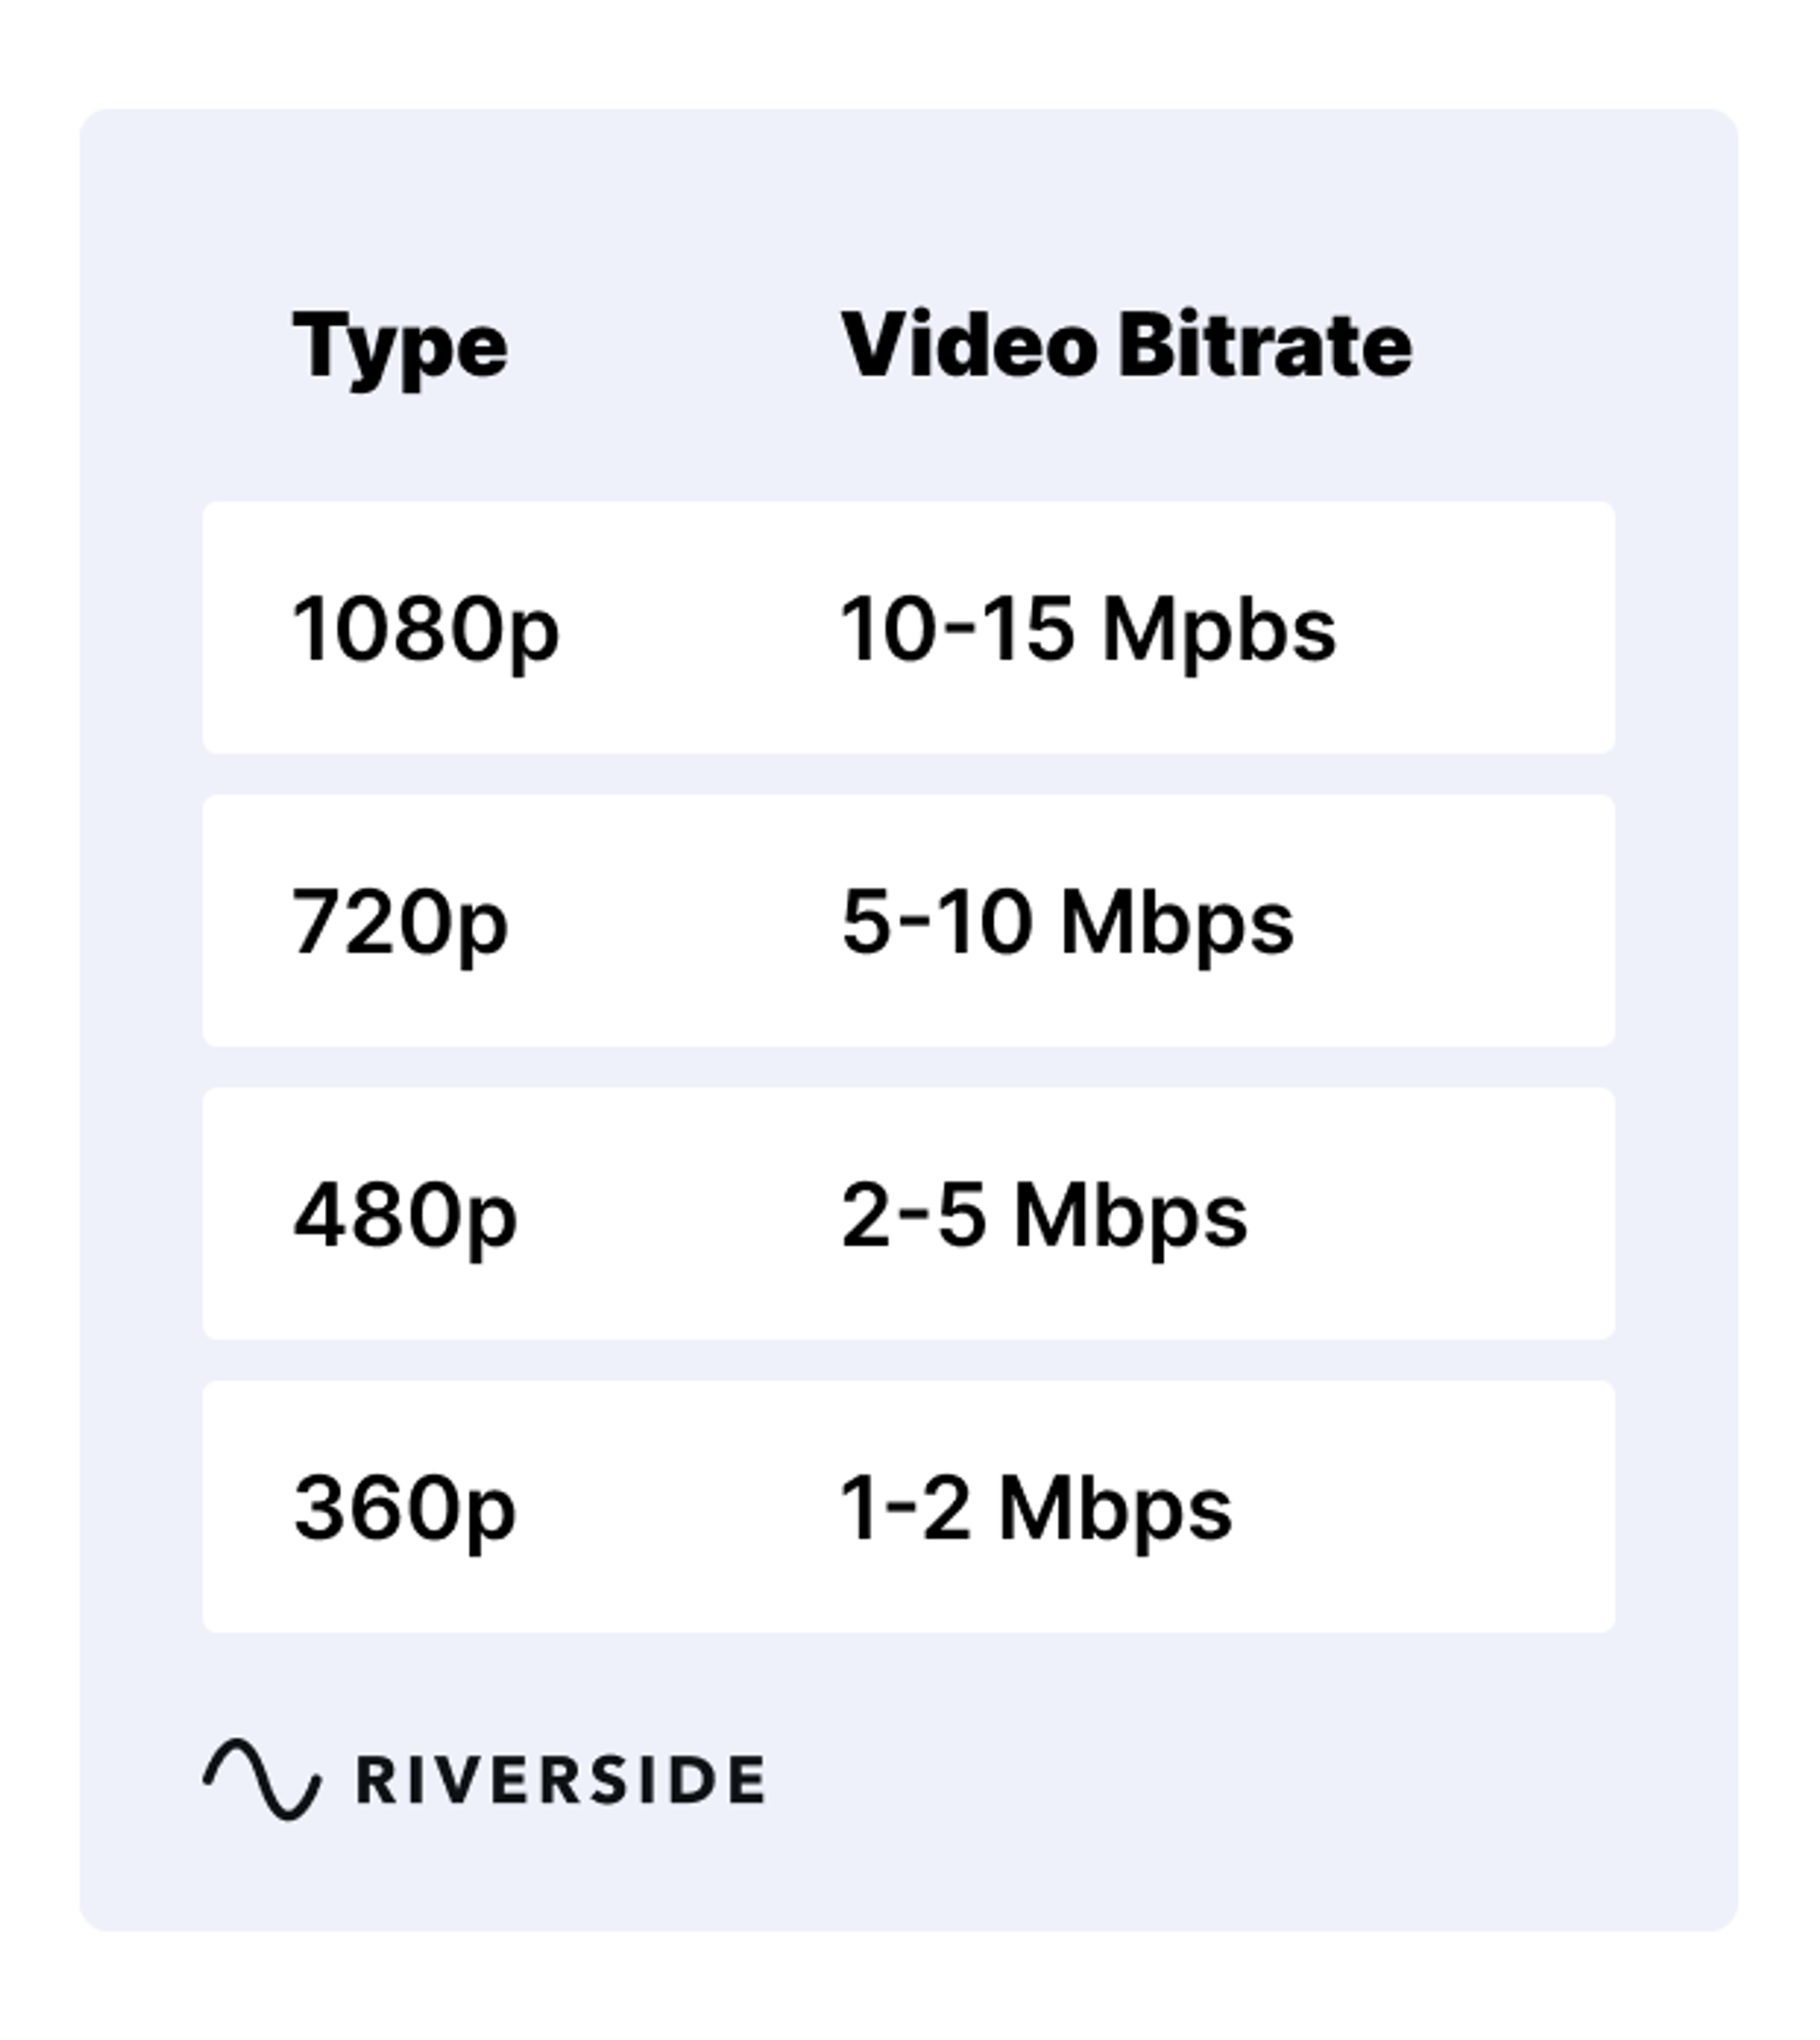 Average video bitrate across different resolutions